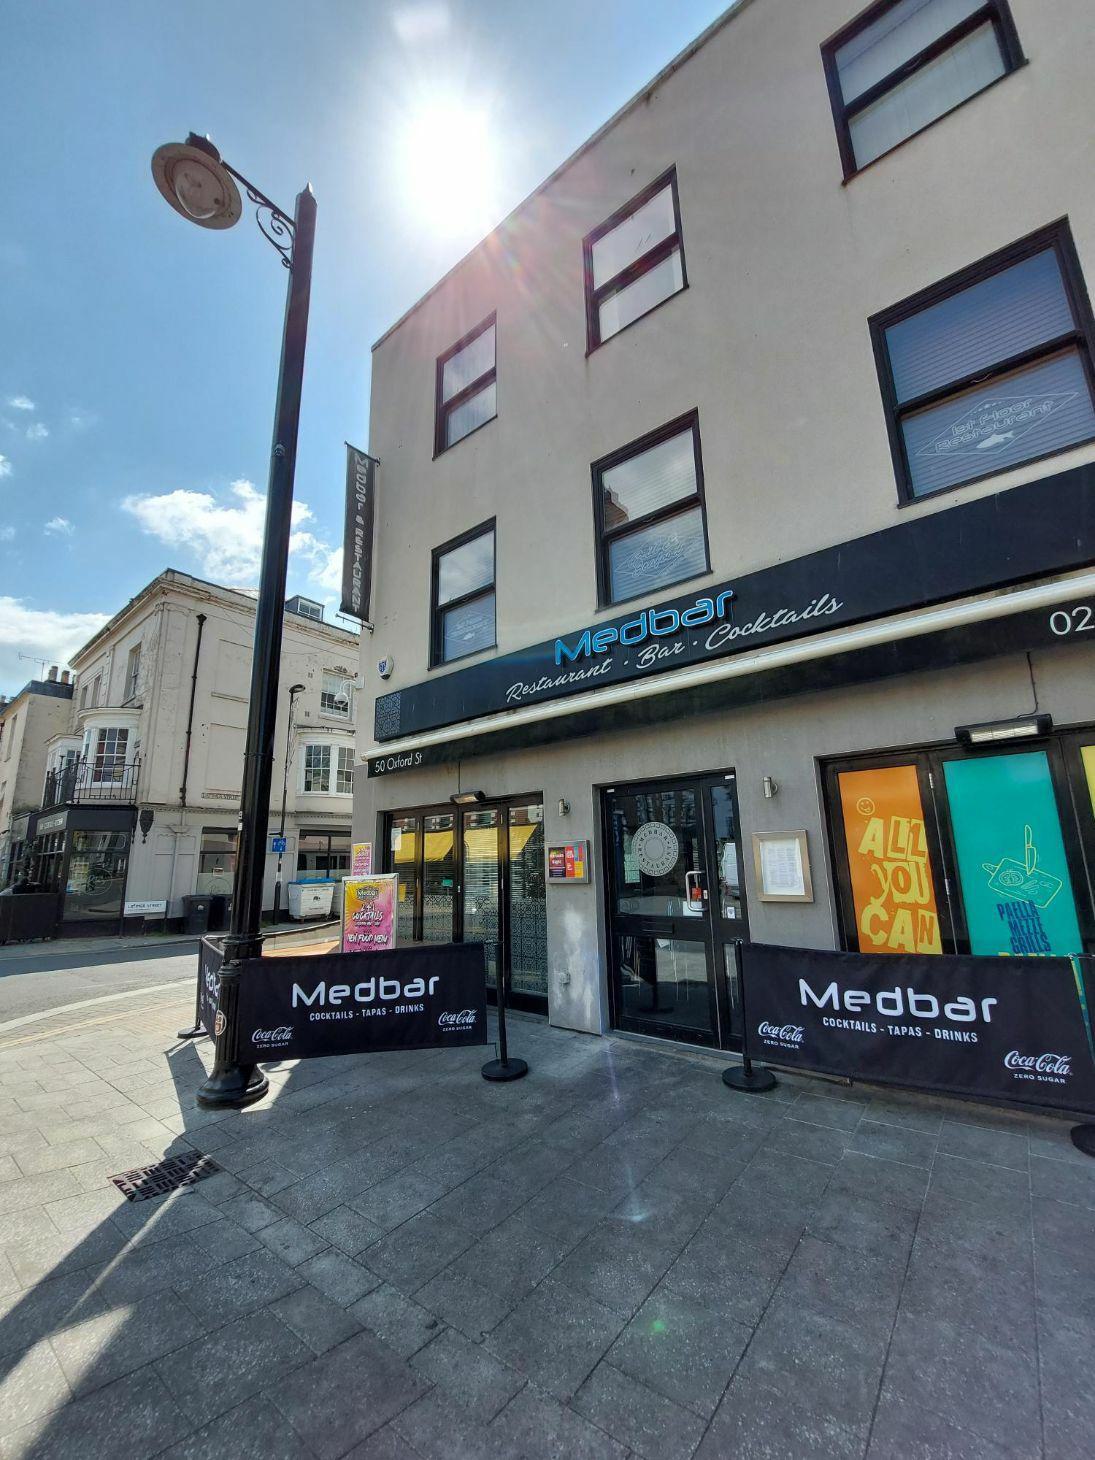 Frontage of Medbar in the summer time